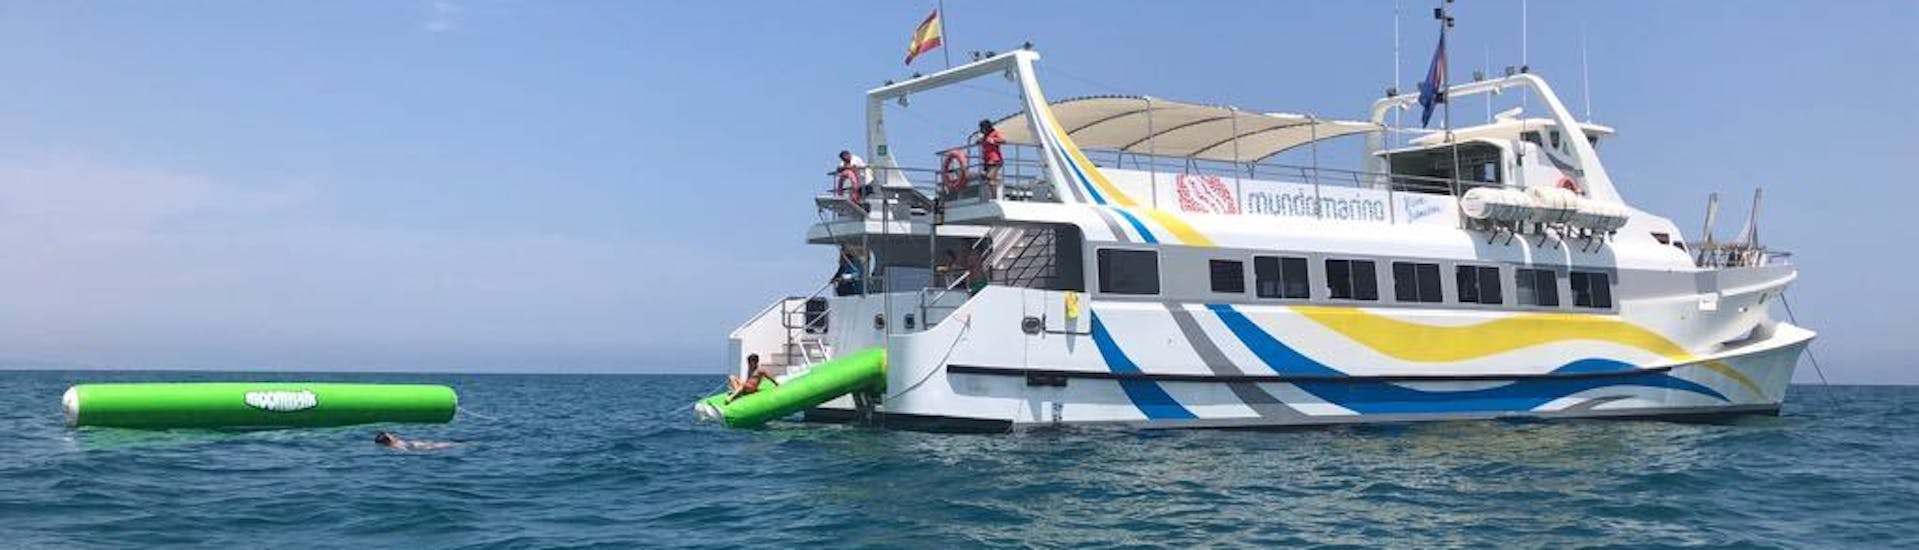 Our catamaran during a Boat Trip from Jávea with Swimming with Mundo Marino.